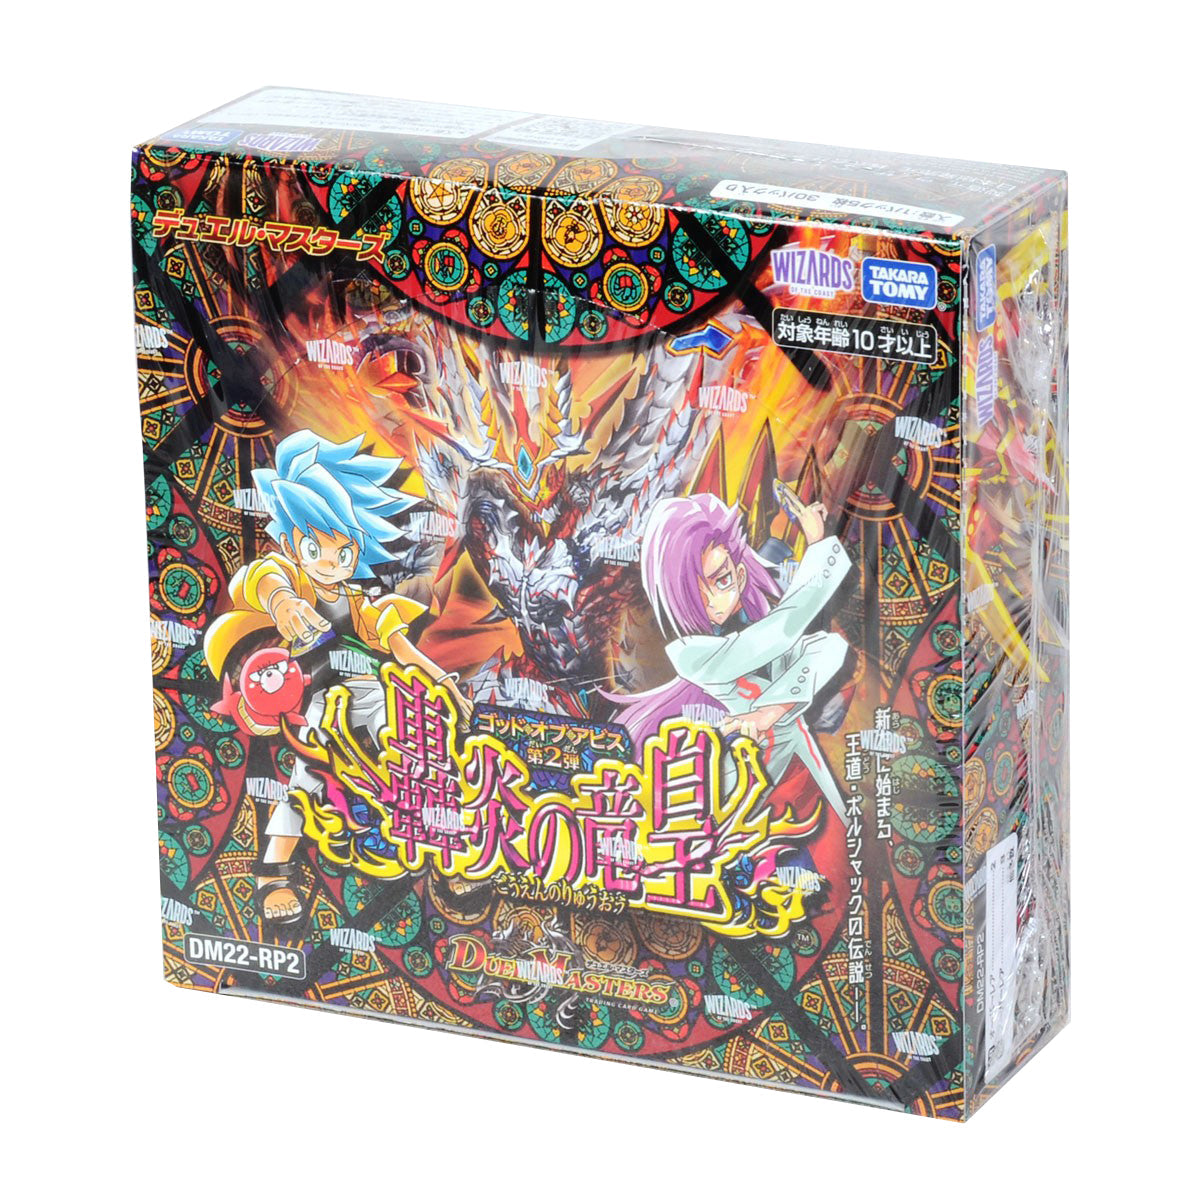 Duel Masters TCG "Dragon Emperor of Roaring Flame" [DM22-RP2] (Japanese)-Booster Box (30 packs)-Takara Tomy-Ace Cards & Collectibles